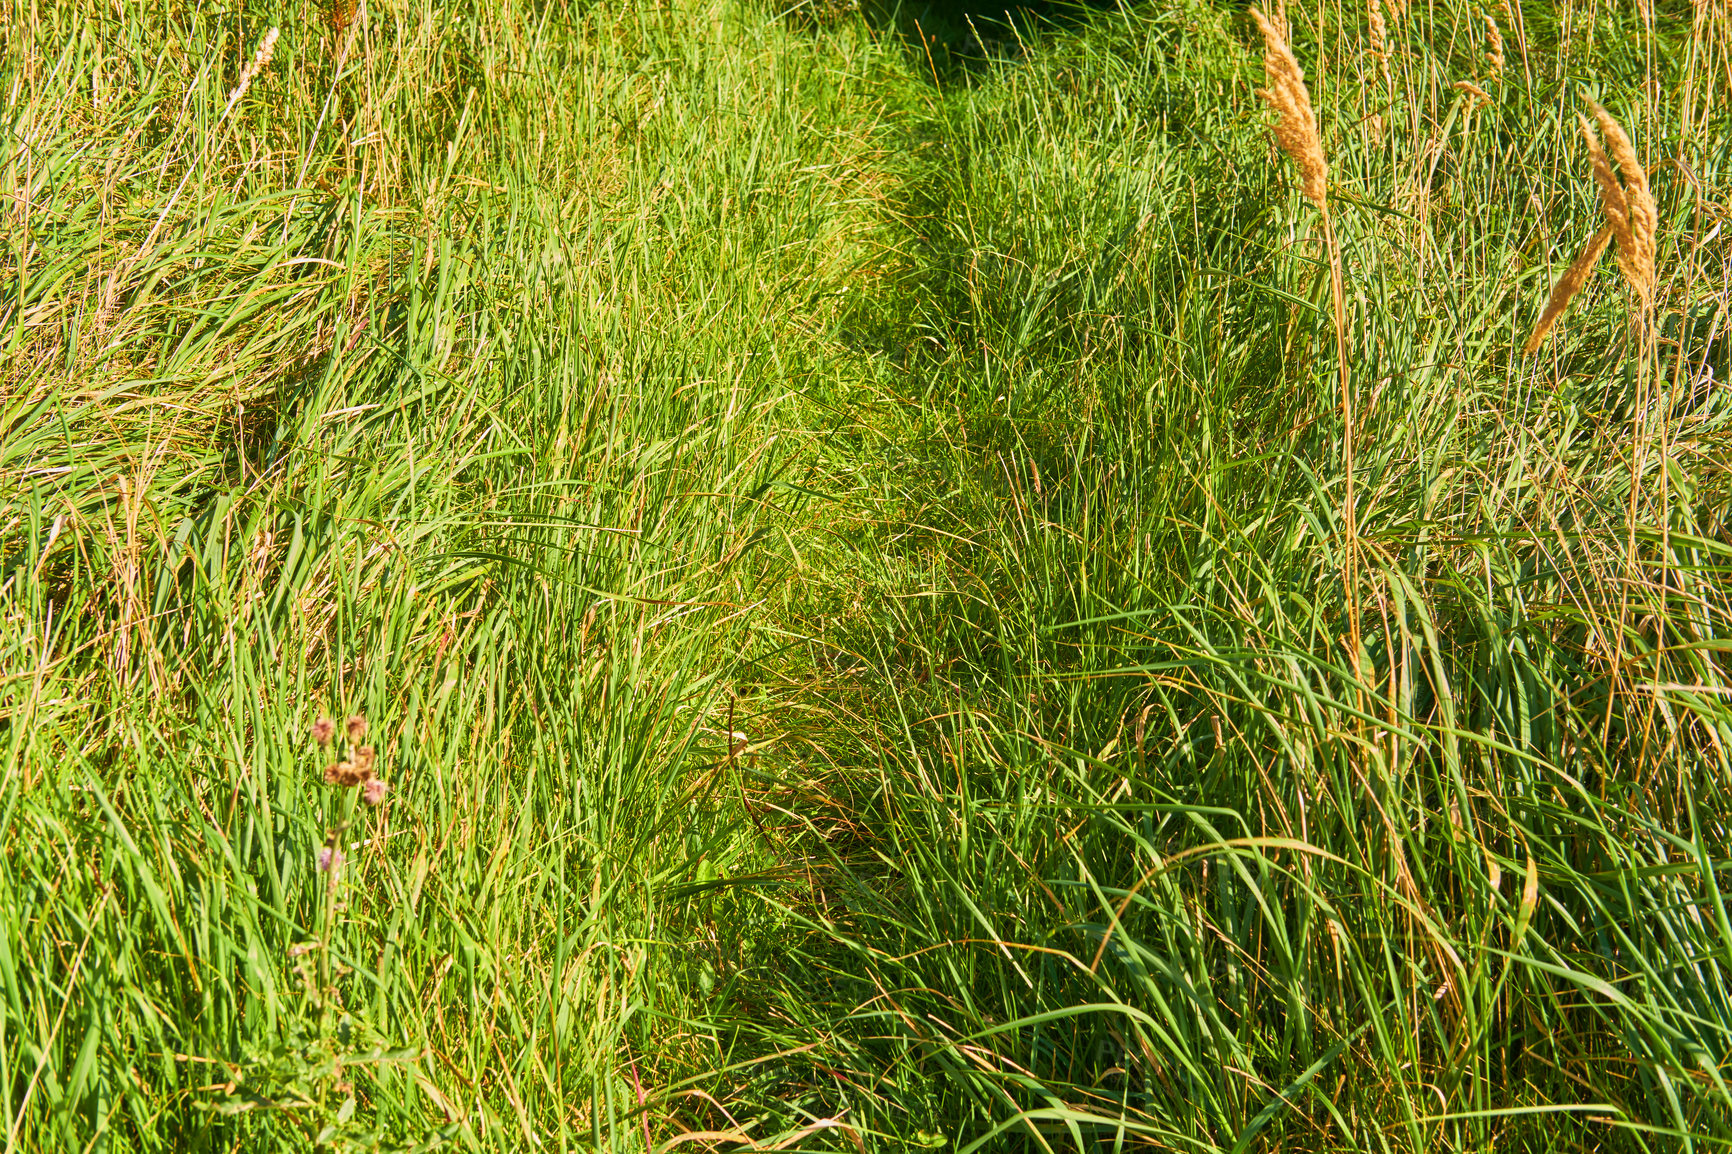 Buy stock photo Overgrown walking path in a grass field outside in the sunshine. Empty rural environment of quiet nature scene of wild reeds in a lush green meadow for a copy space background.  